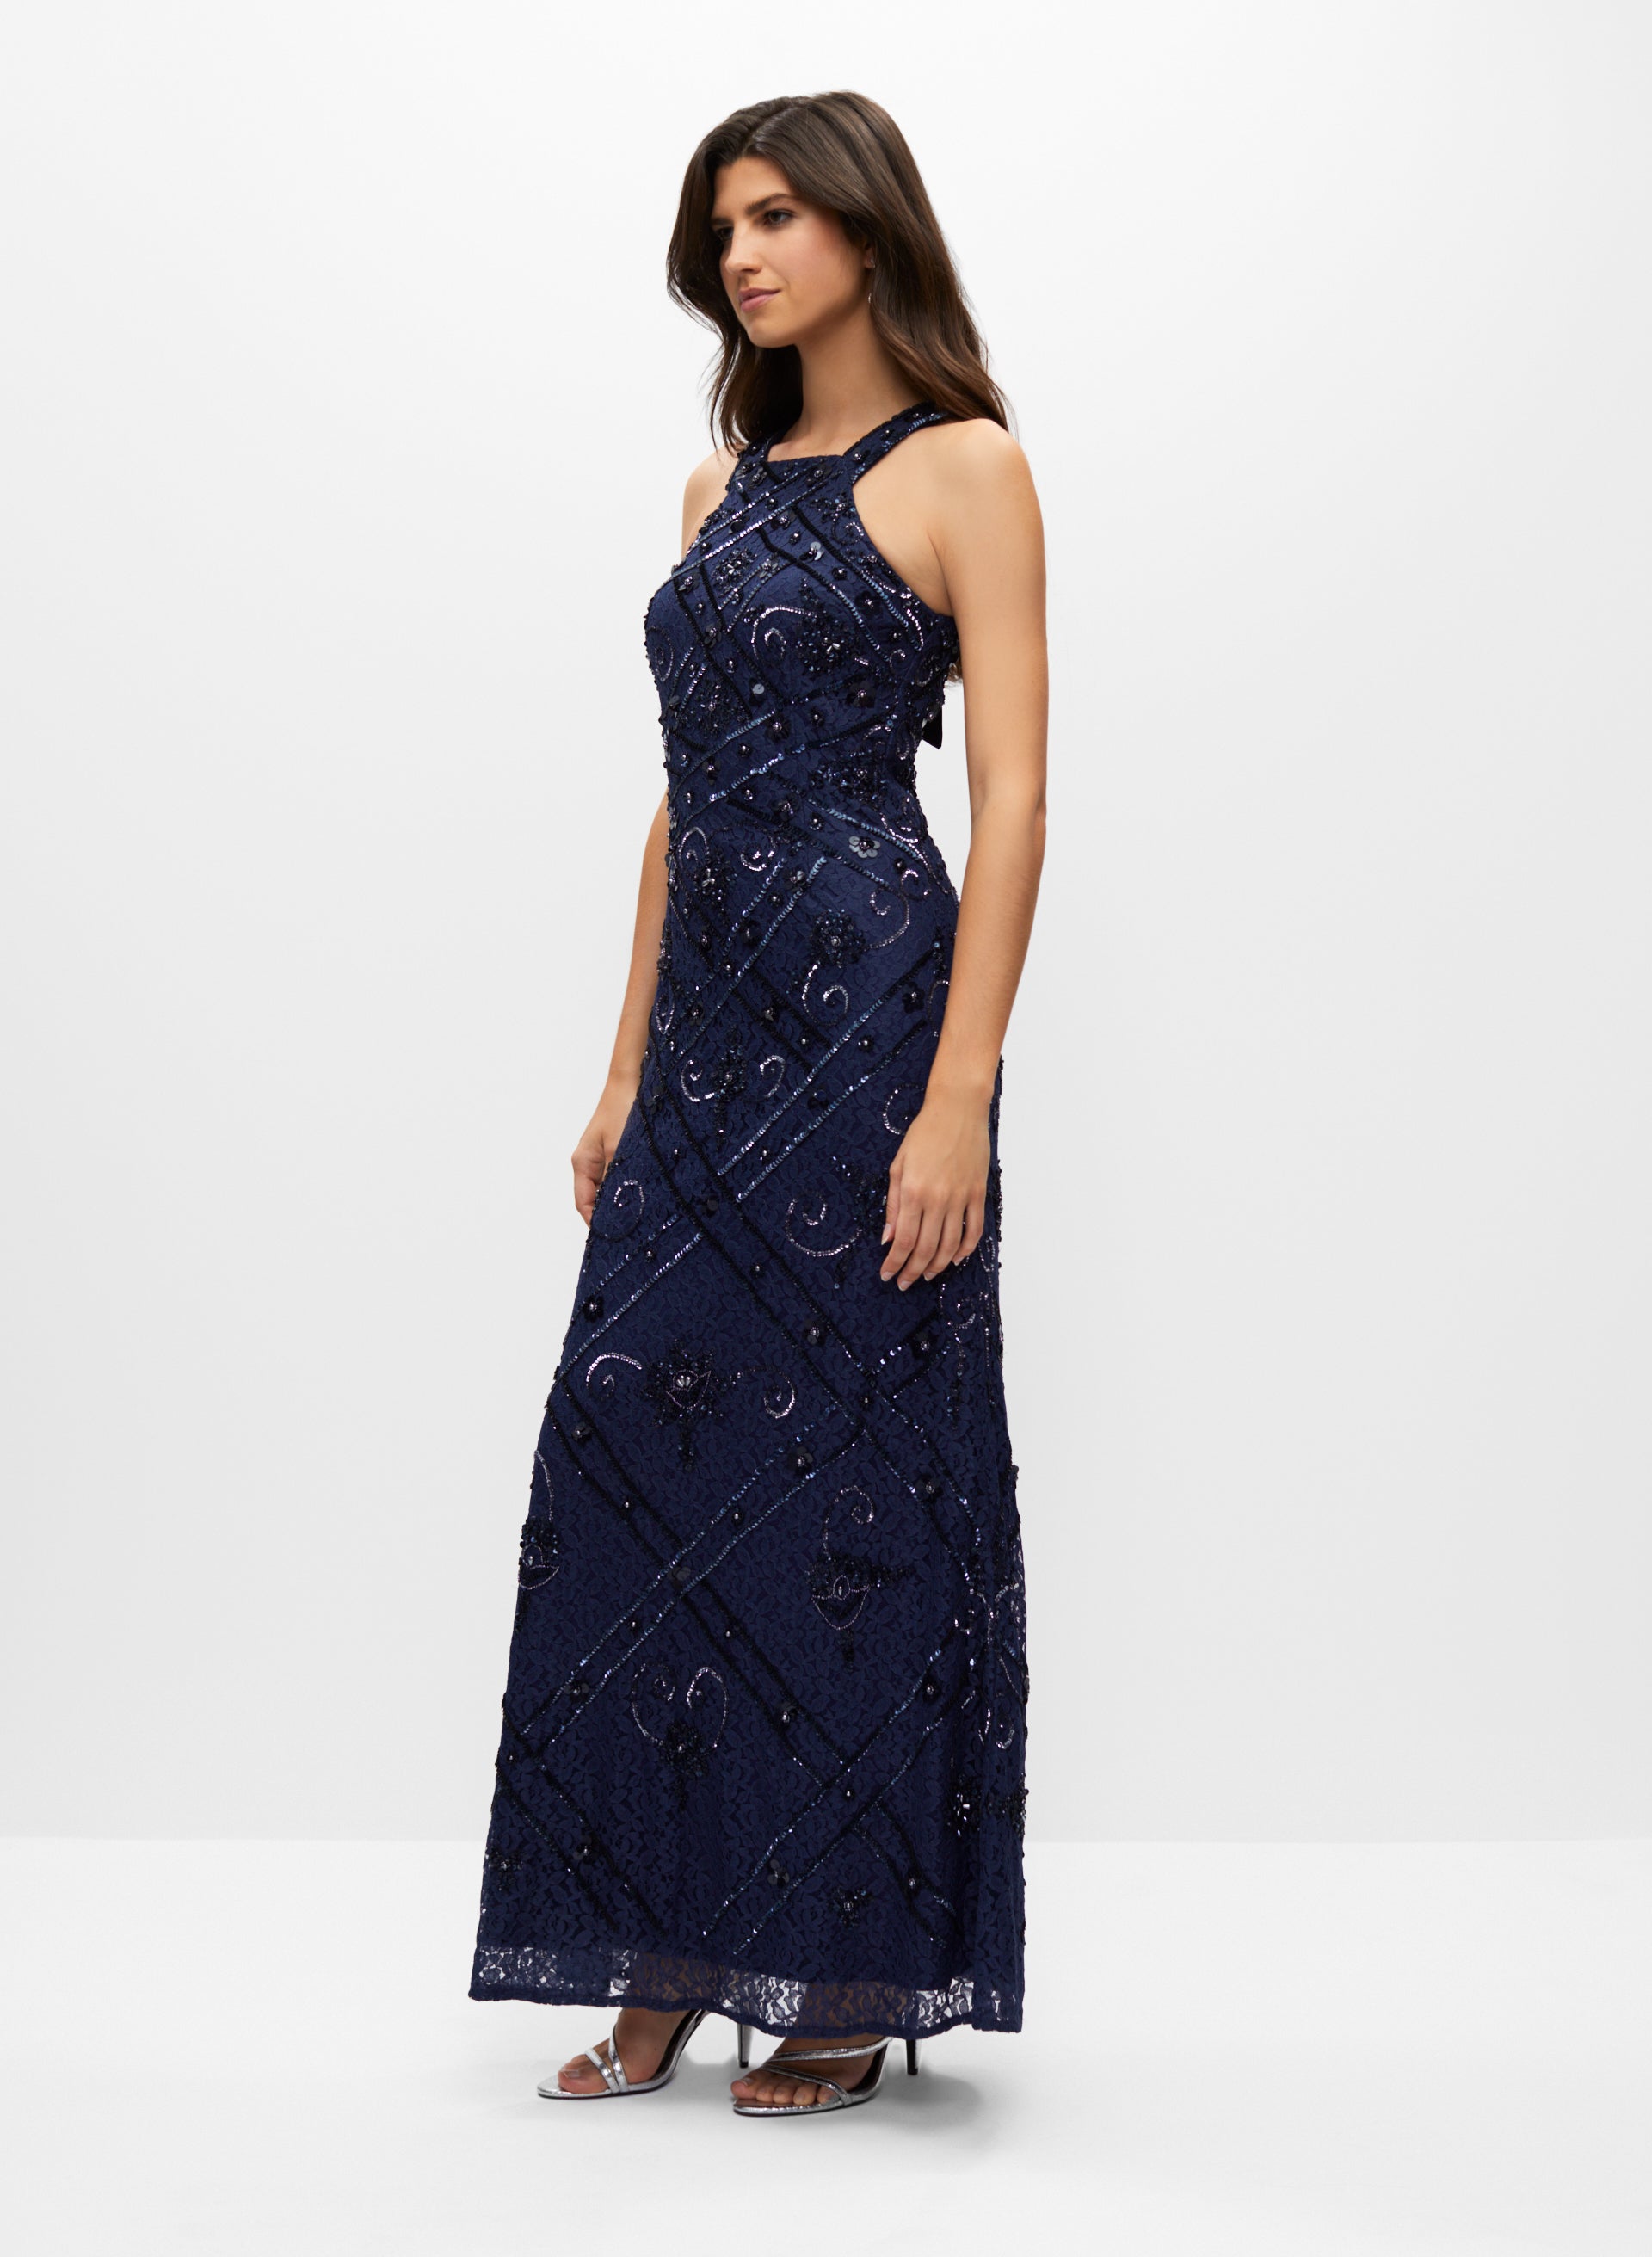 Adrianna Papell - Beaded Mesh Gown